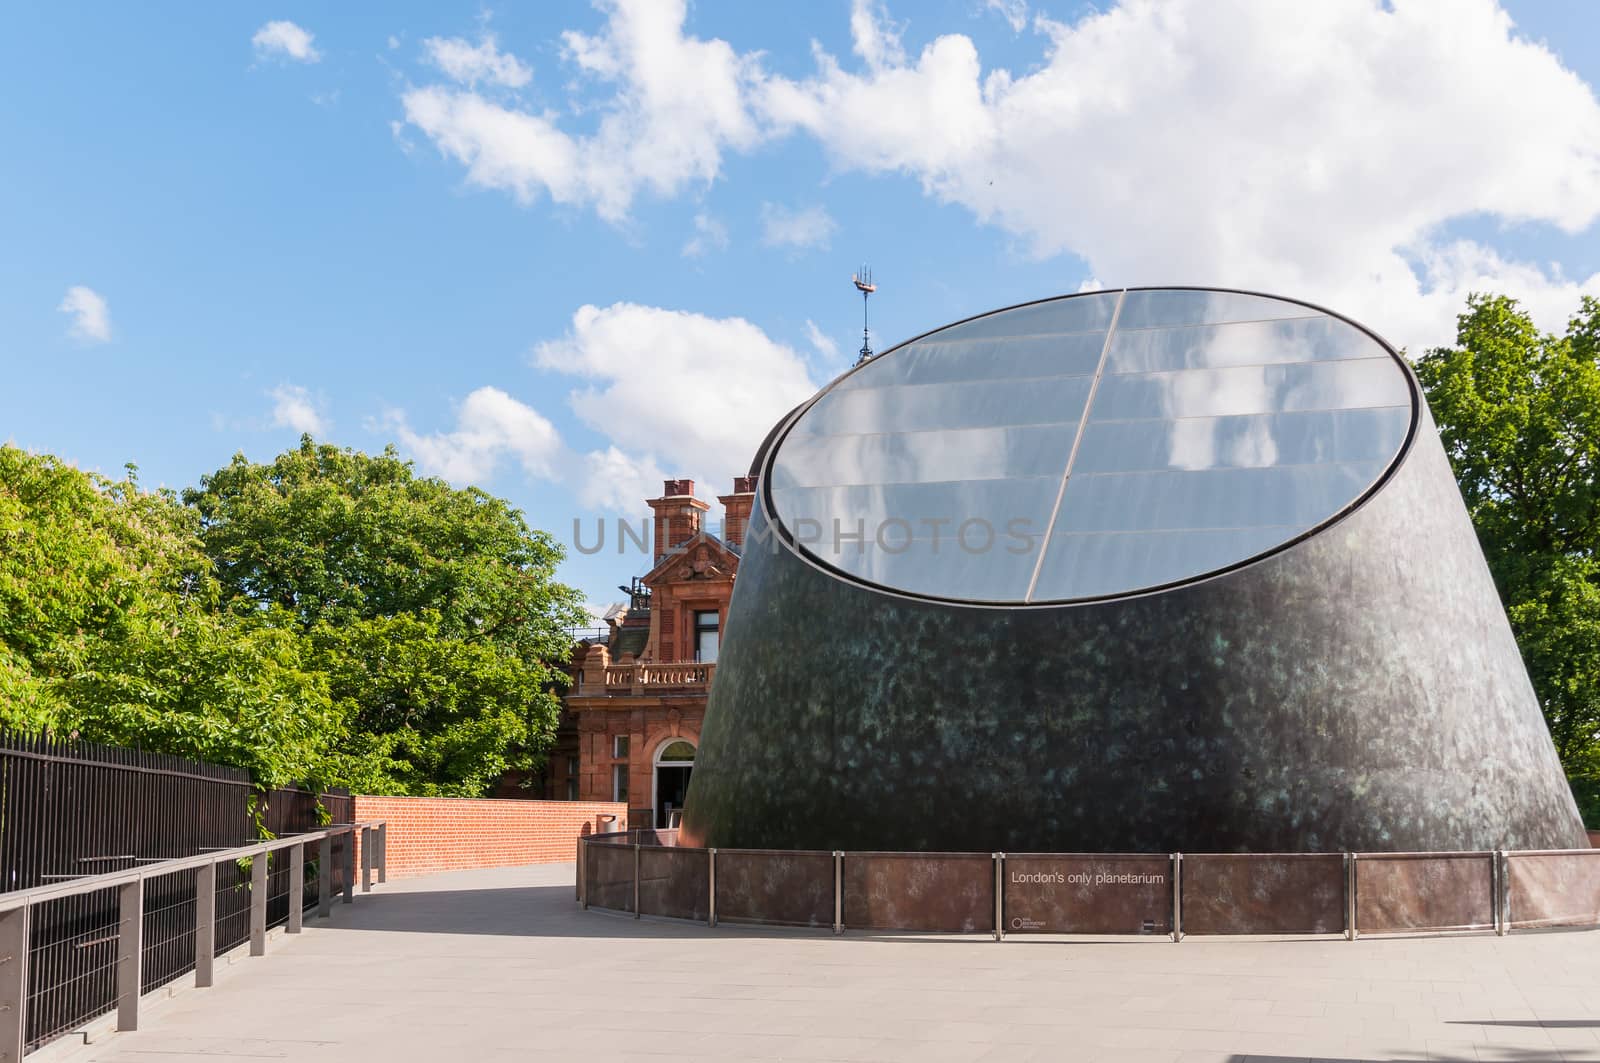 London, United Kingdom - May 9, 2011: Building of the Peter Harrison Planetarium. It is a 120-seat digital laser planetarium, situated in Greenwich Park, London and is part of the National Maritime Museum.